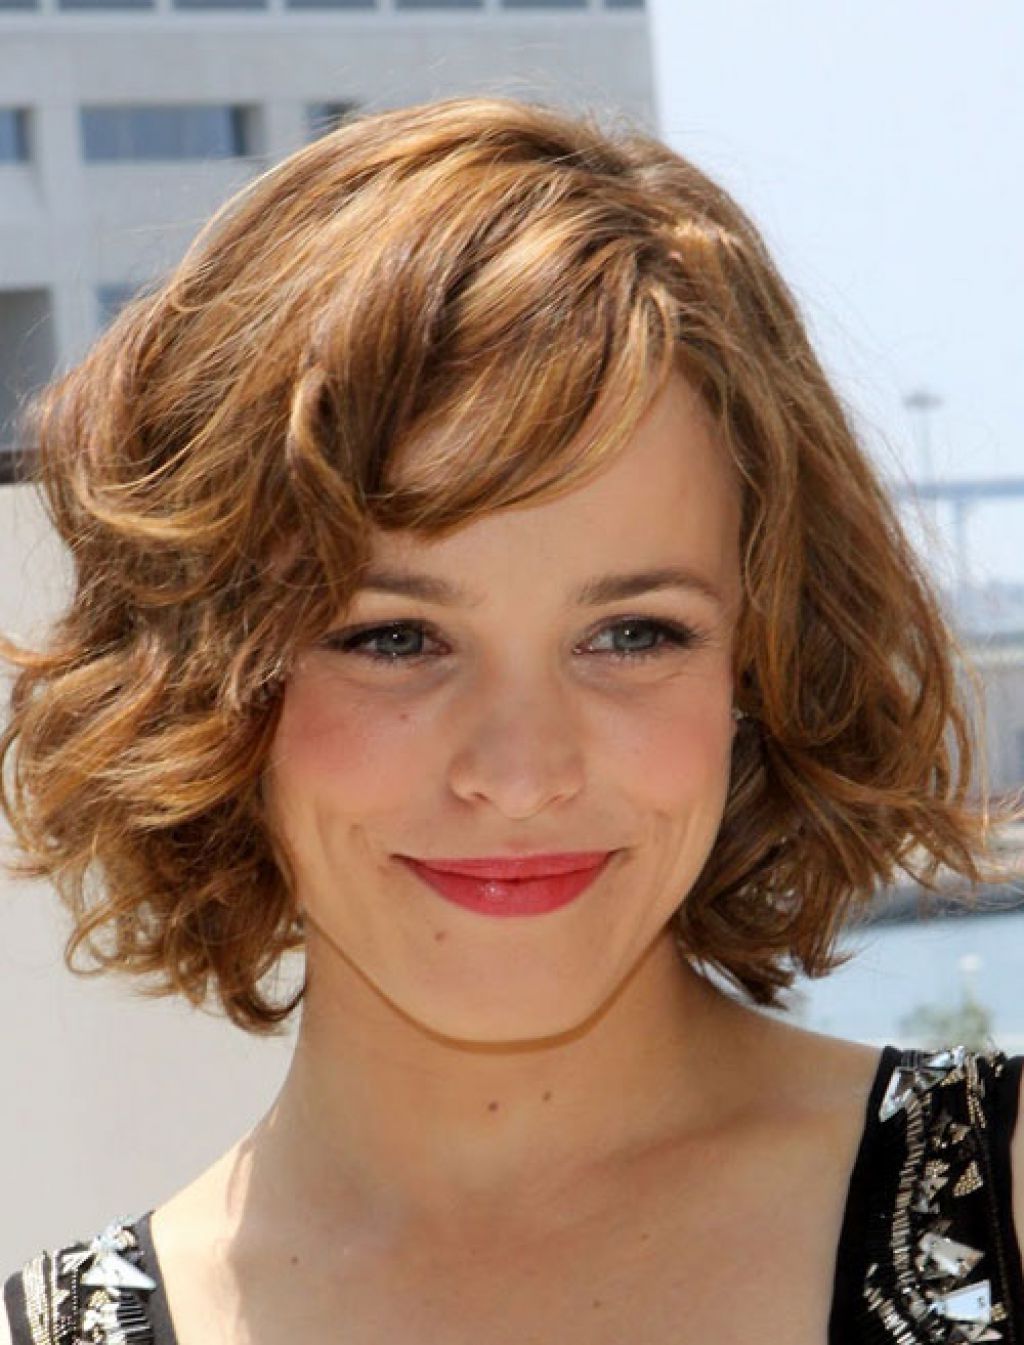 12 Formal Hairstyles For Short Hair You Can't Do Without Intended For Recent Pixie Hairstyles With Curly Hair (Photo 19 of 33)